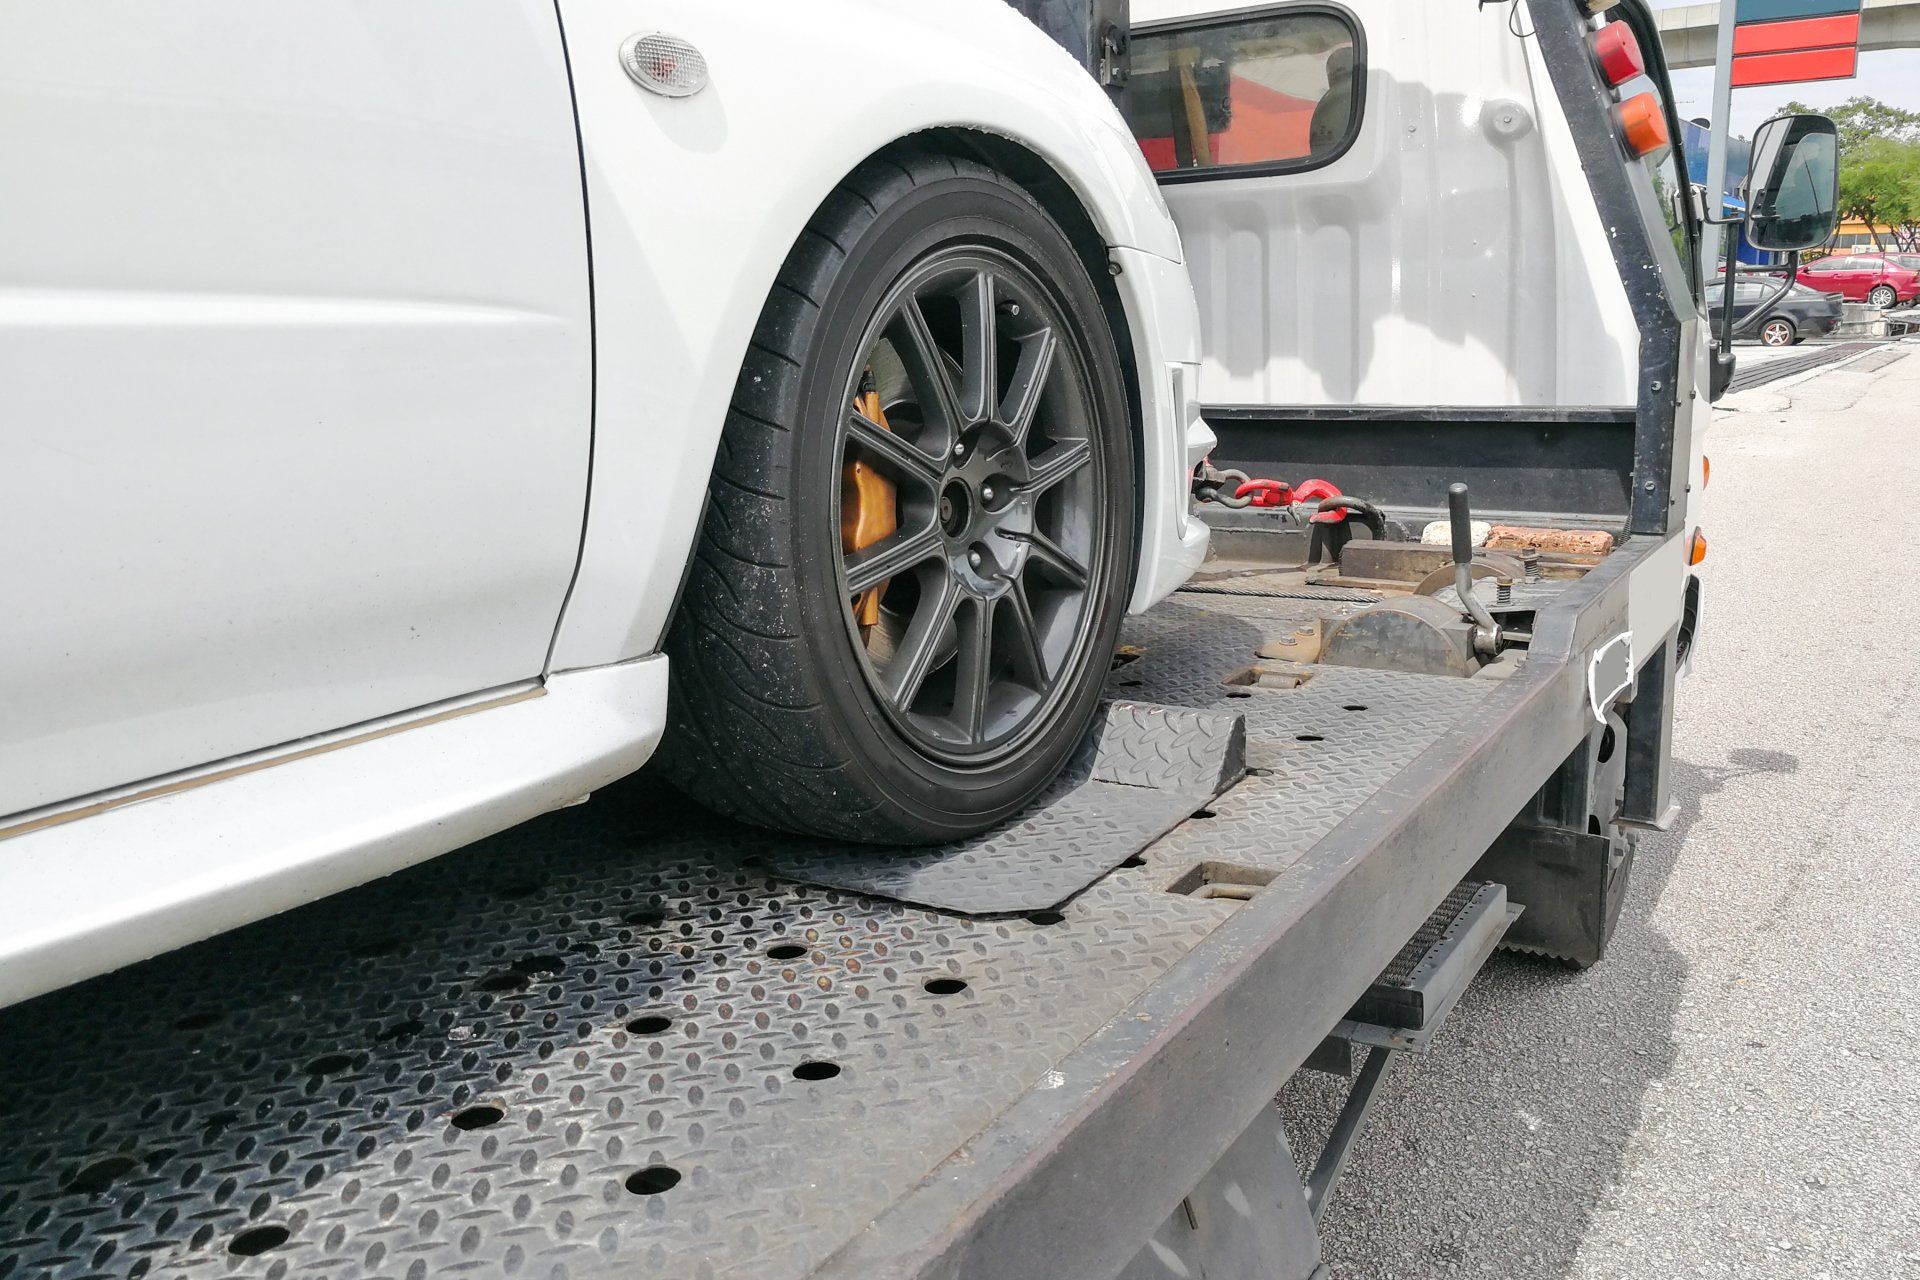 Tips for Leaving Your Vehicle to Be Towed